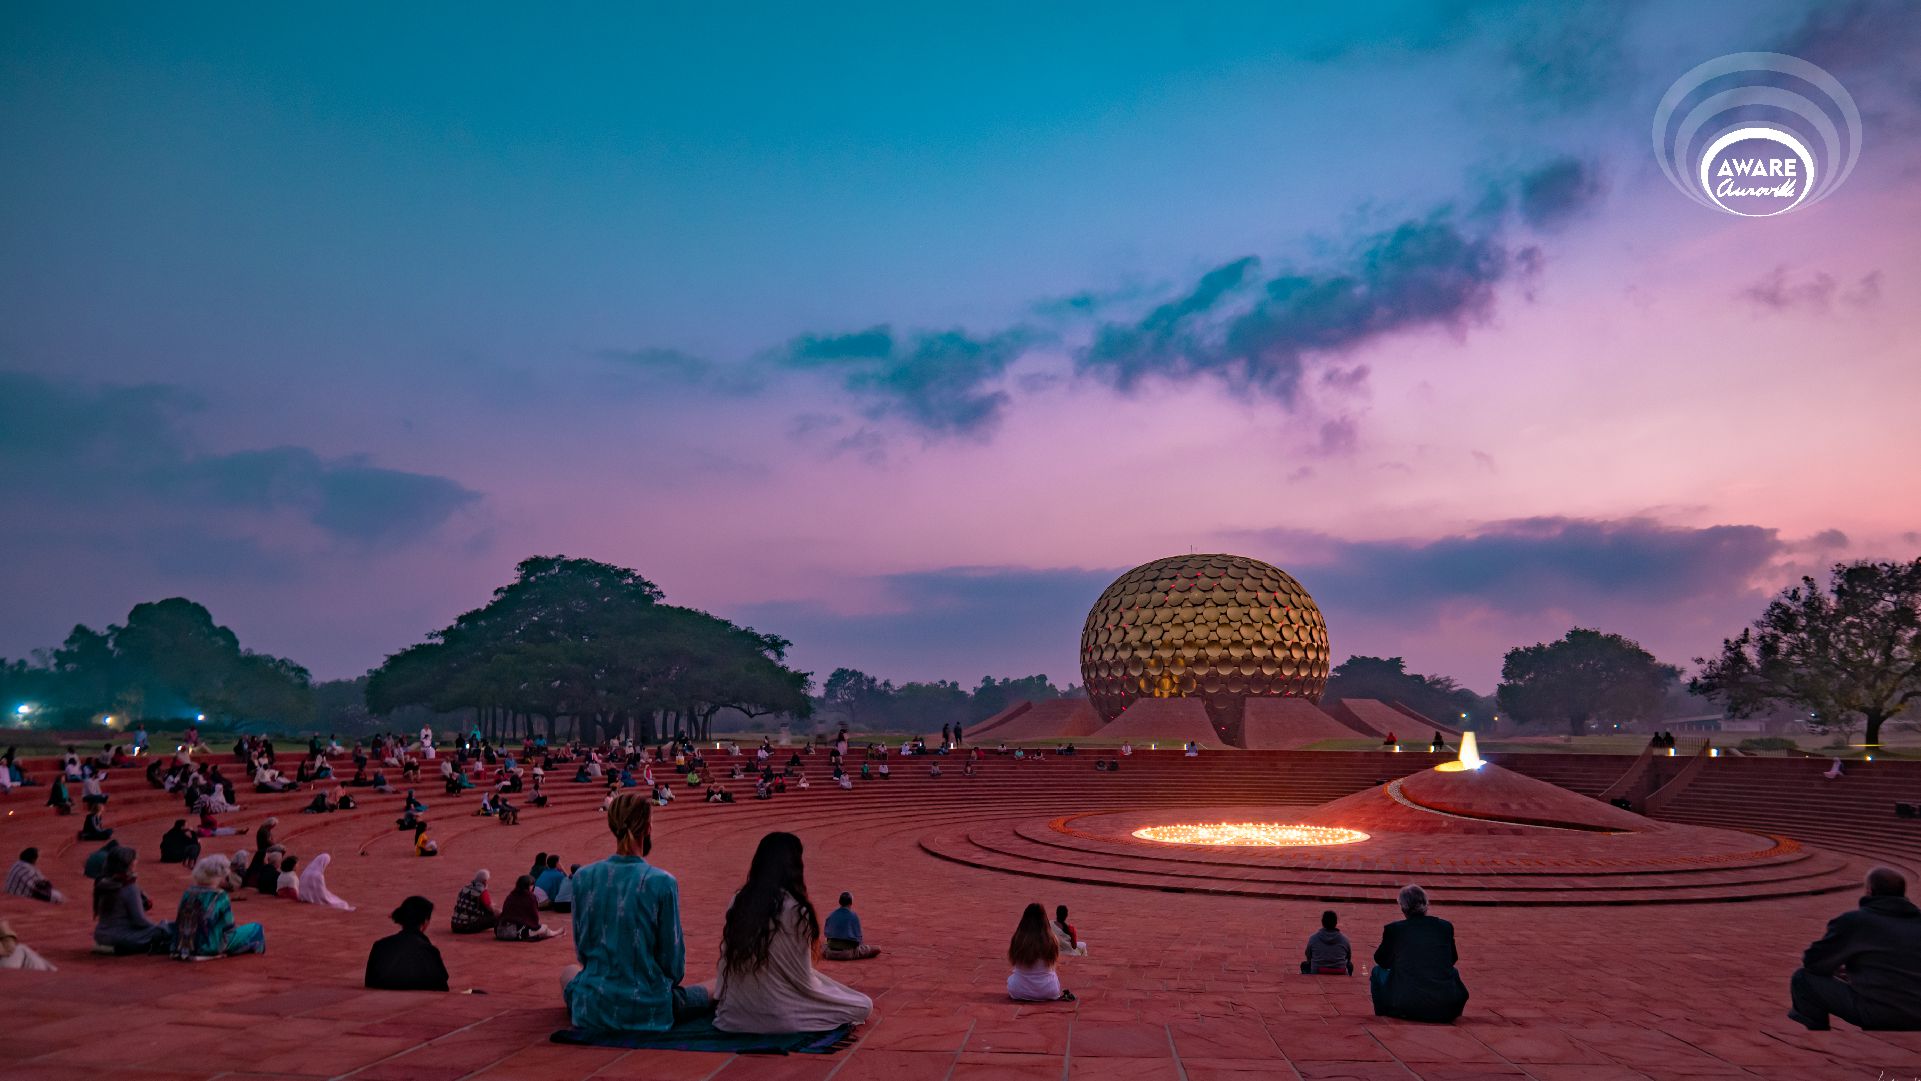 Imagining a visit to Auroville in 2030